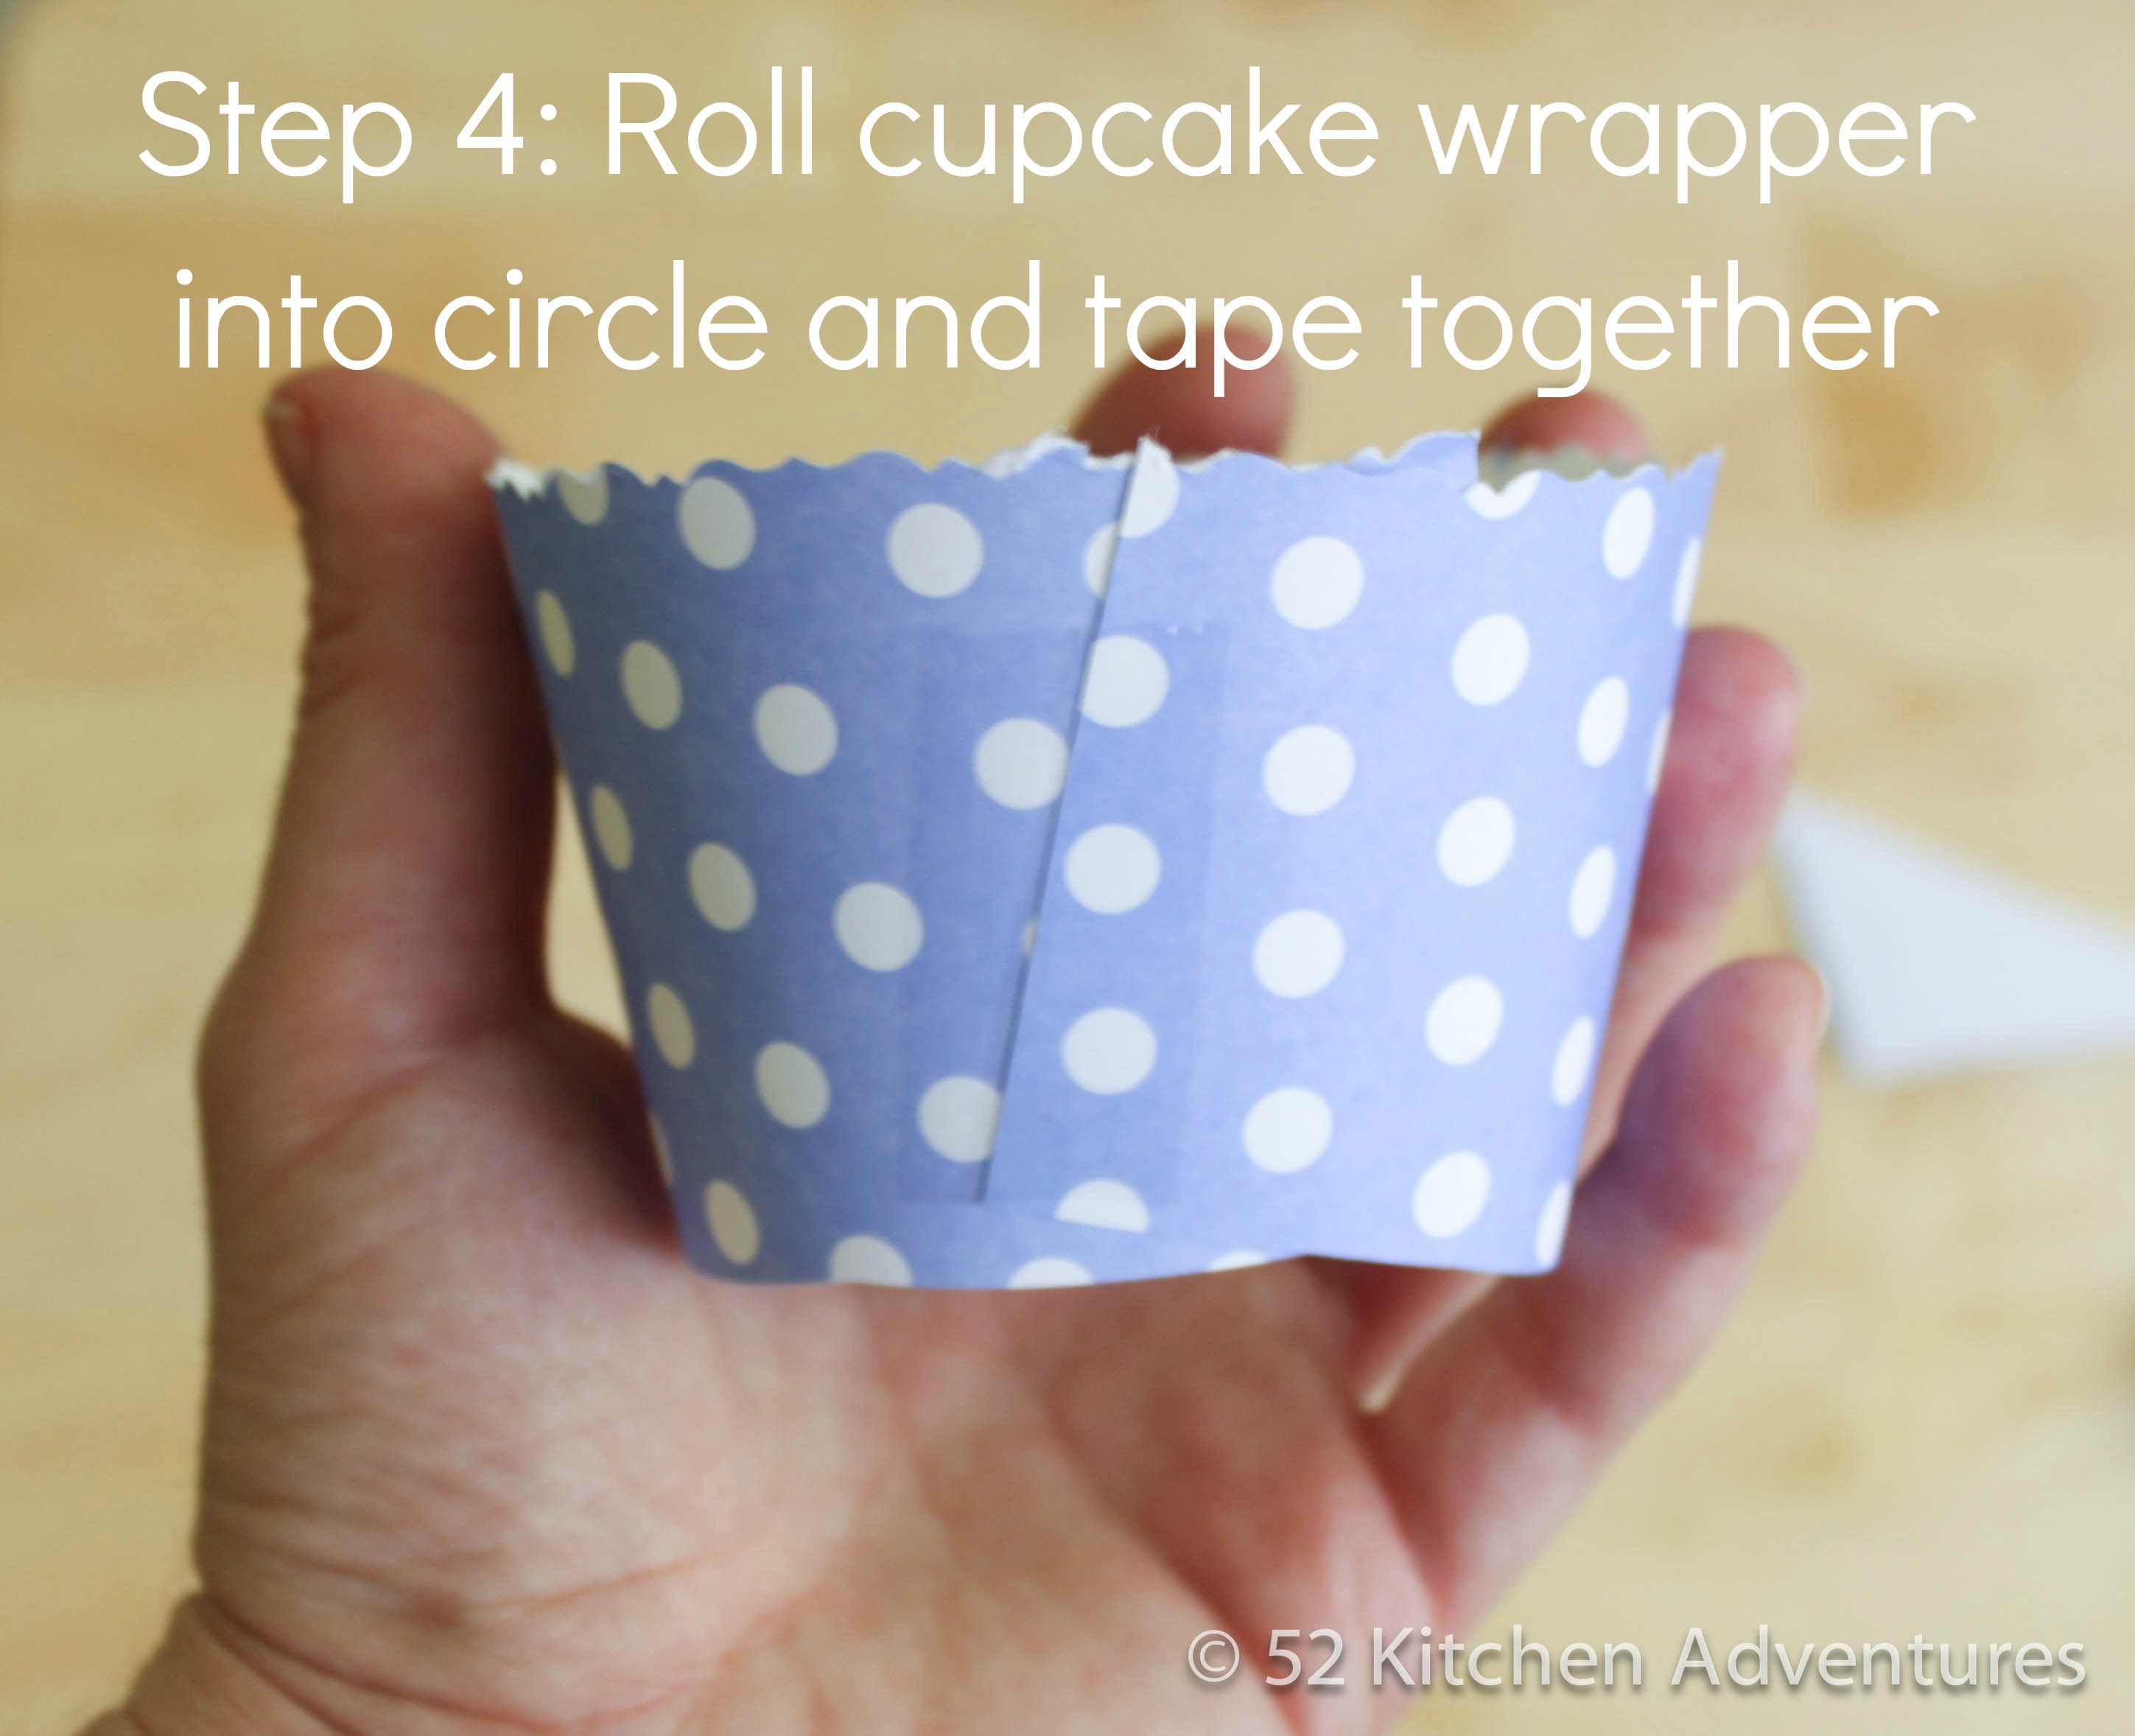 http://www.52kitchenadventures.com/wp-content/uploads/2012/07/Step-4-Roll-cupcake-wrapper-and-tape-together.jpg